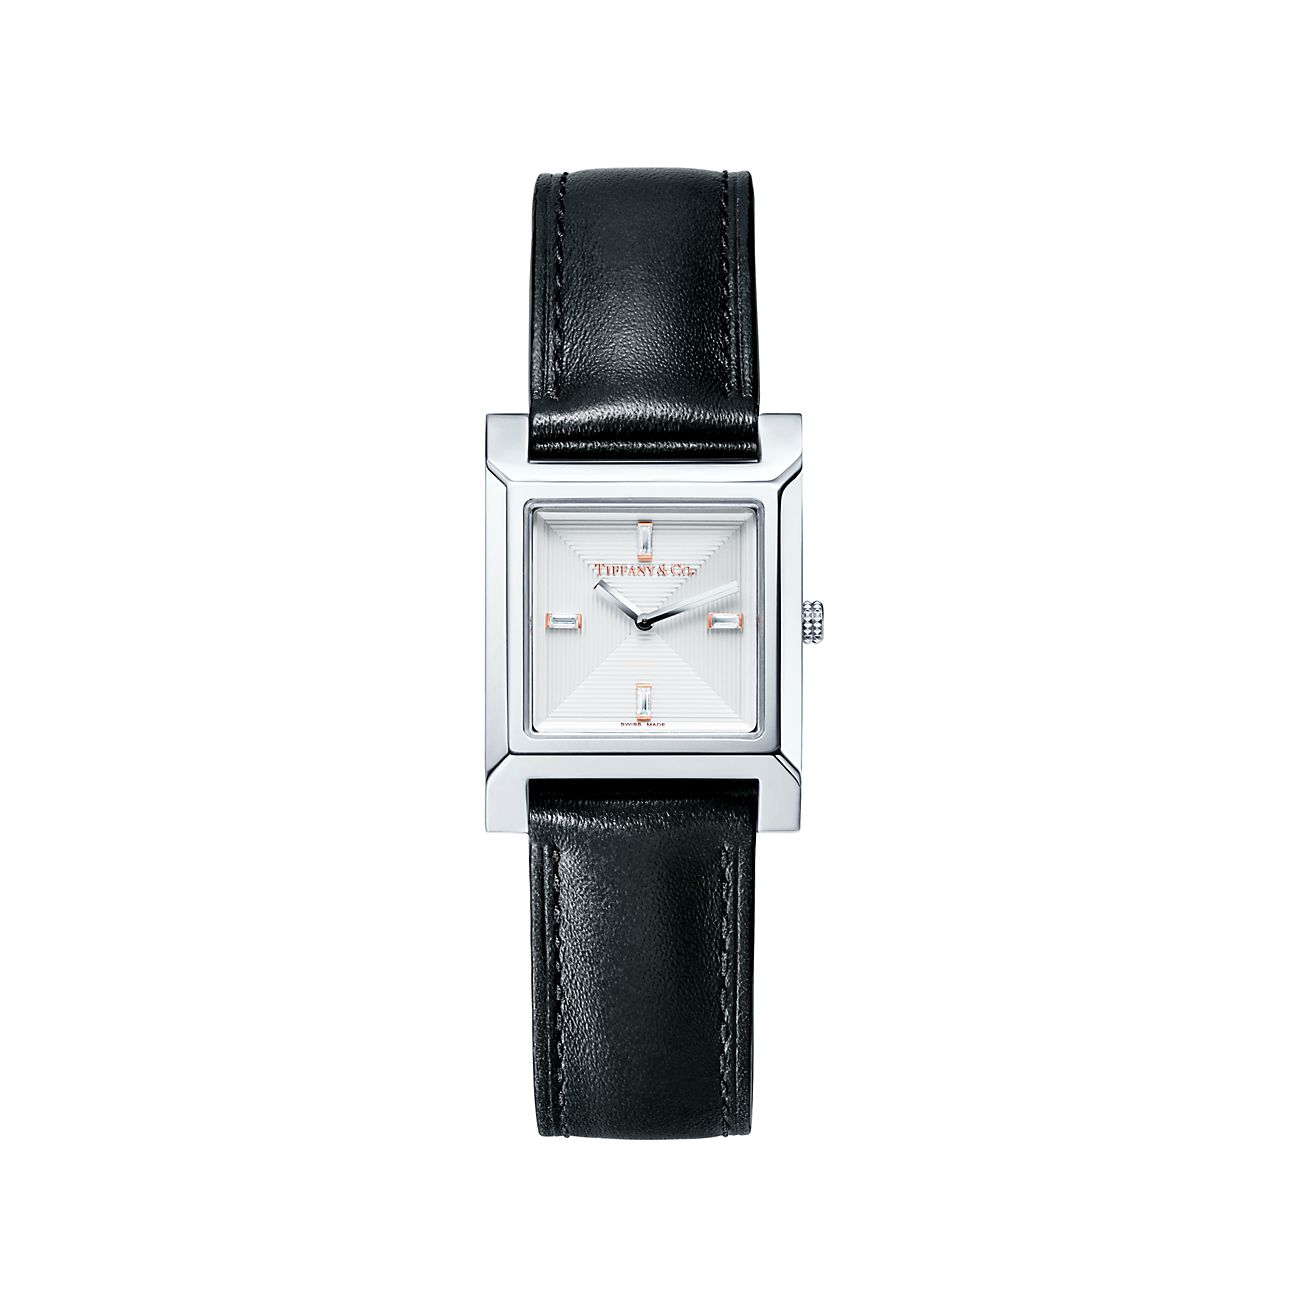 tiffany 1837 makers watch